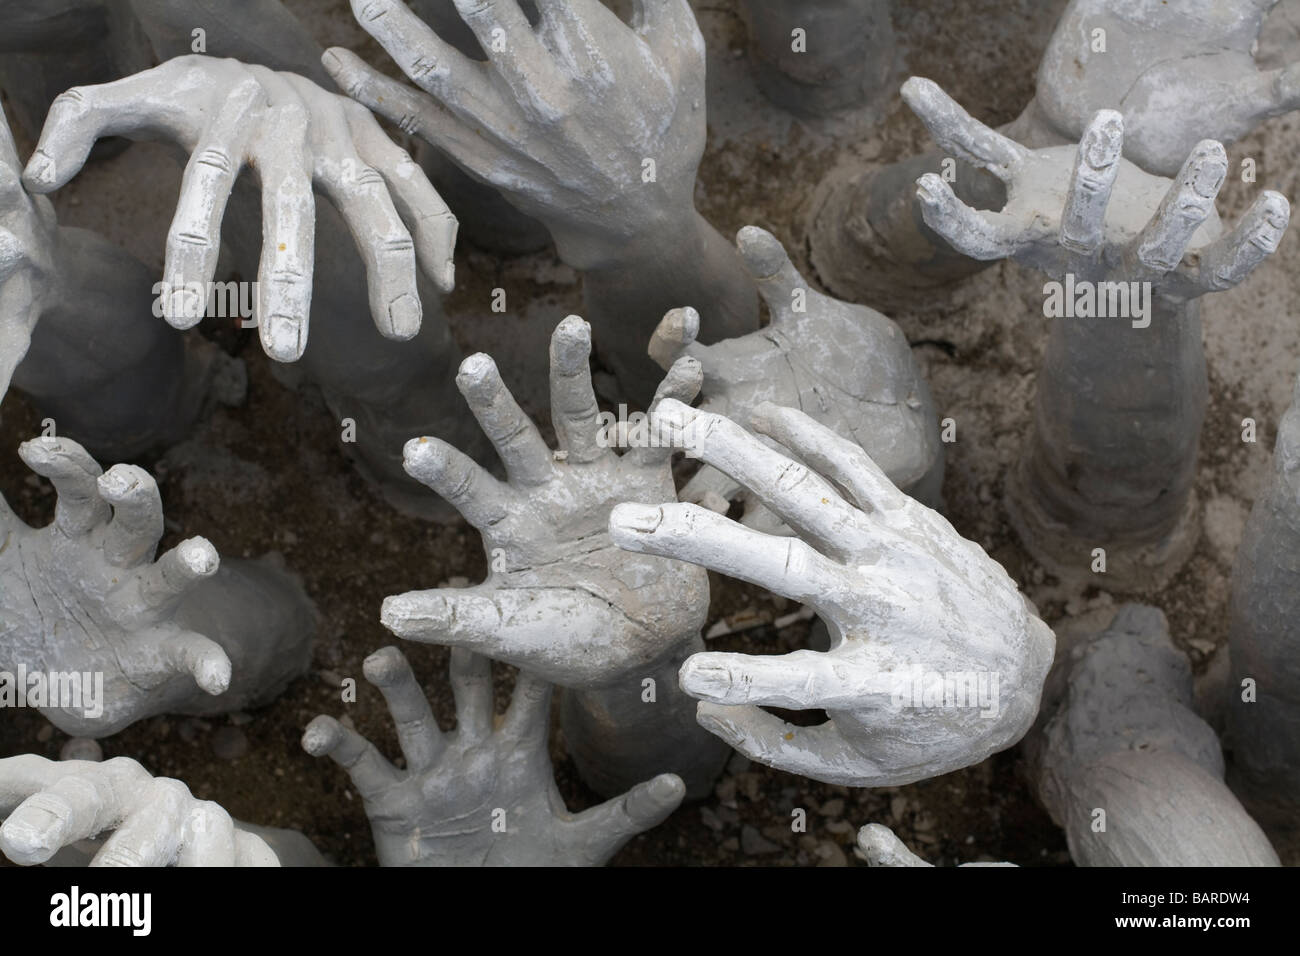 A sculpture of hands reaching up at you at Wat Rong Khun temple, Thailand Stock Photo